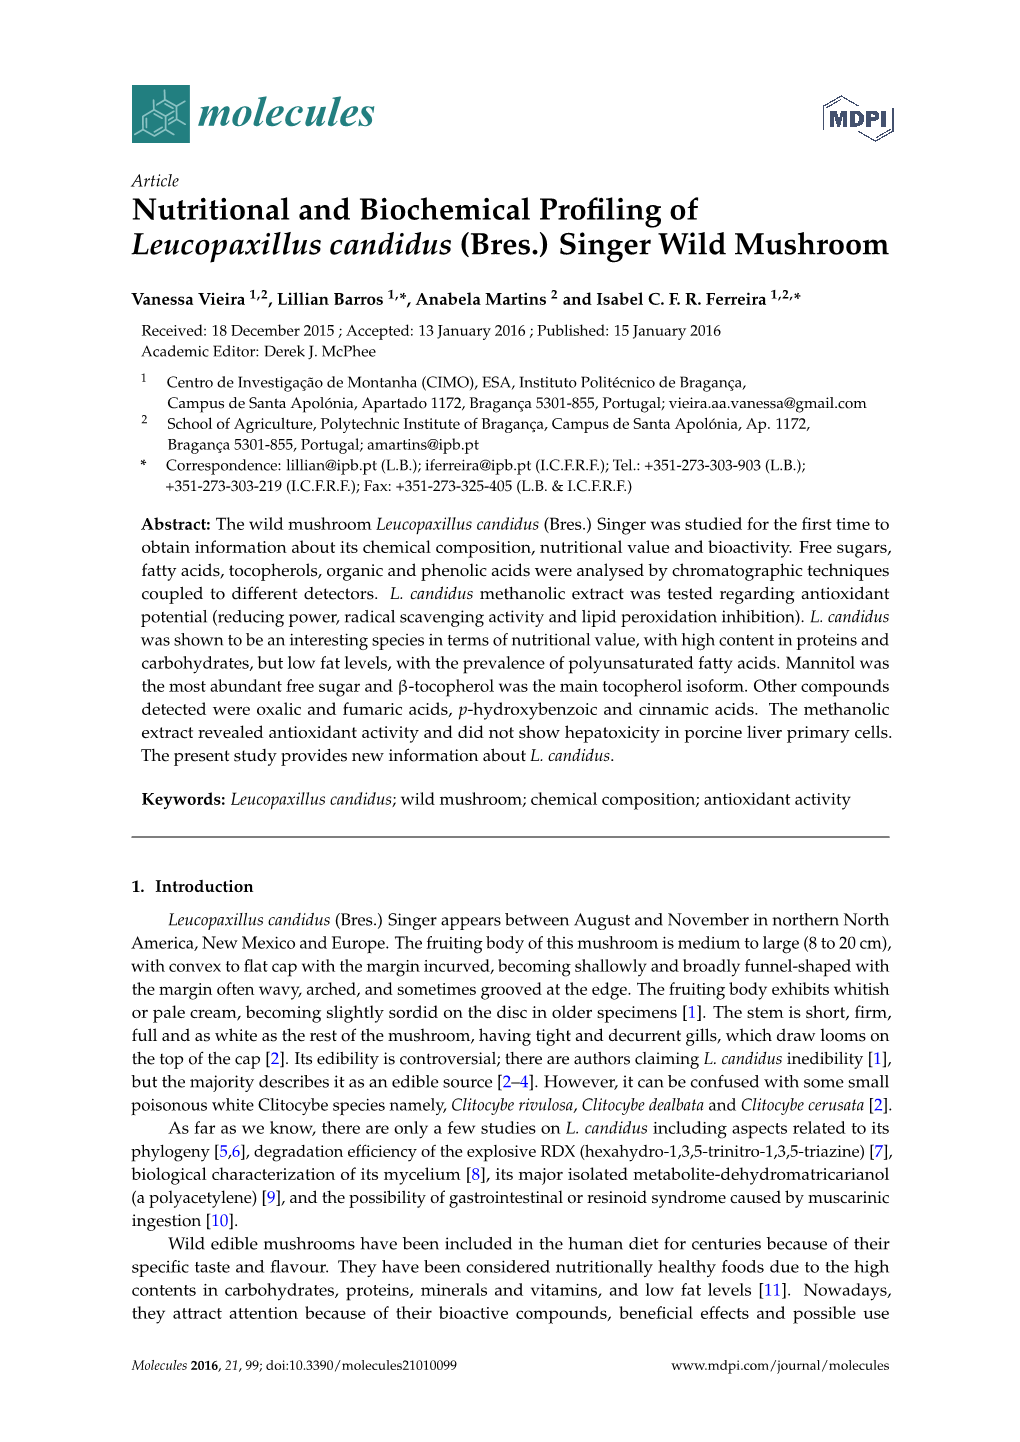 Nutritional and Biochemical Profiling of Leucopaxillus Candidus (Bres